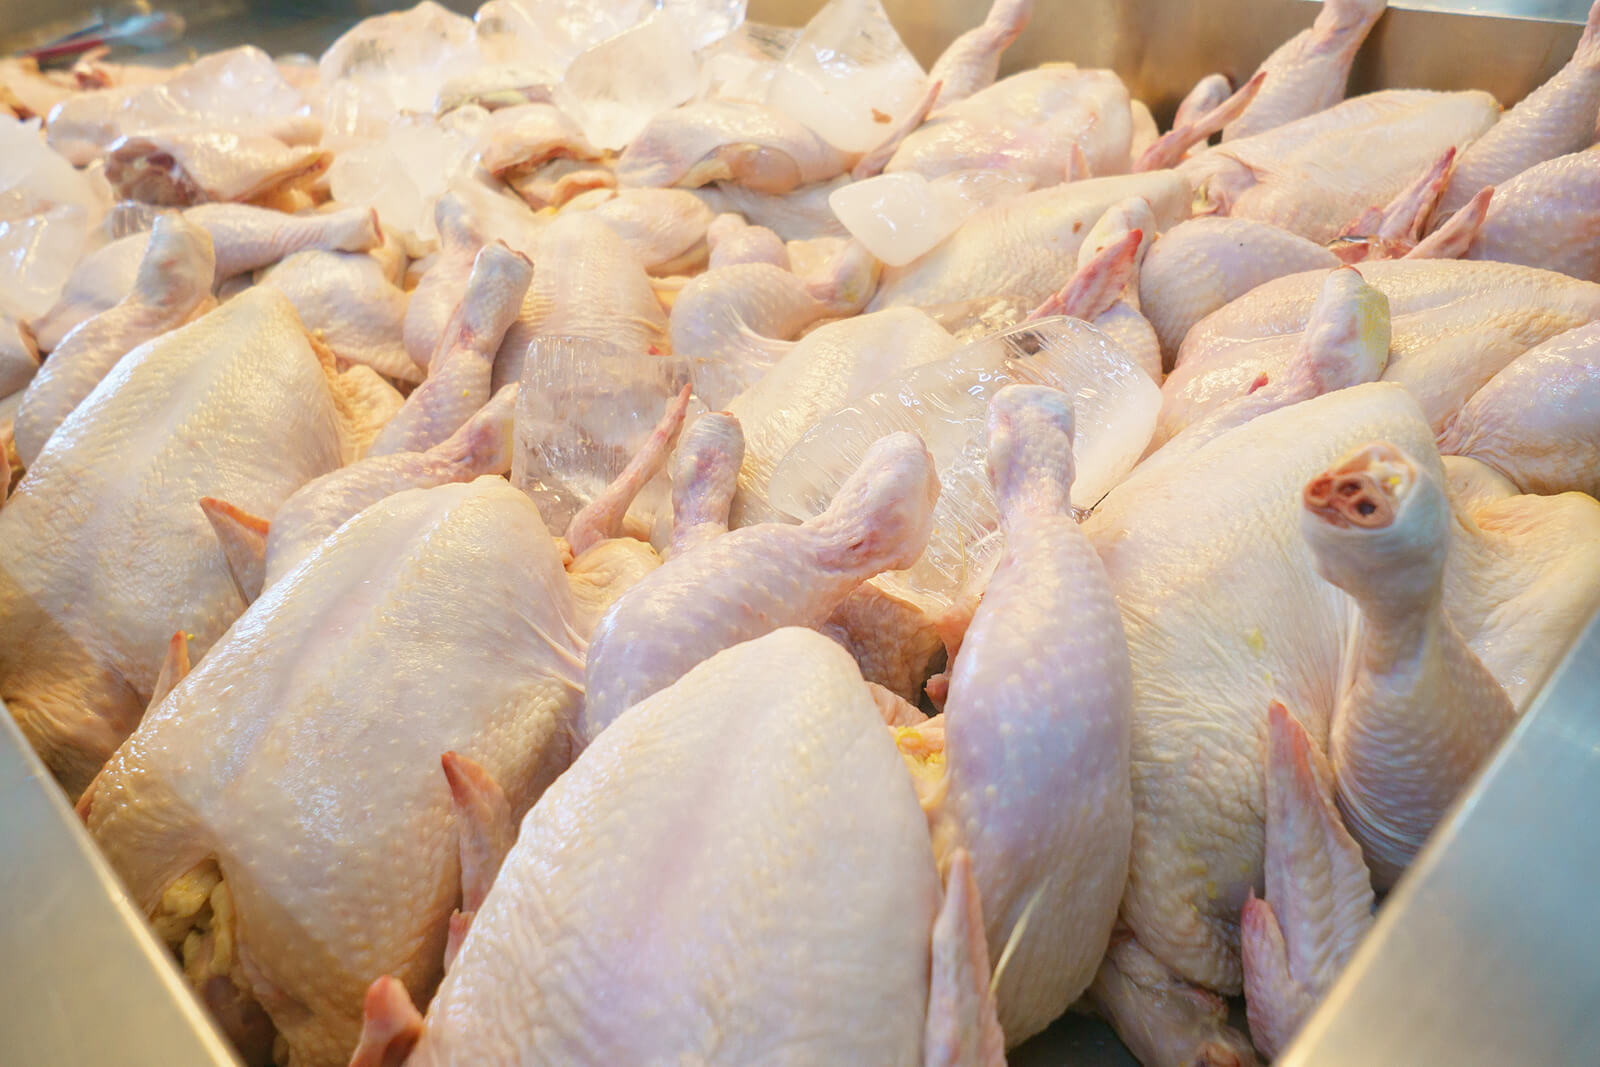 Storing Frozen Chicken And How To Freeze It Properly